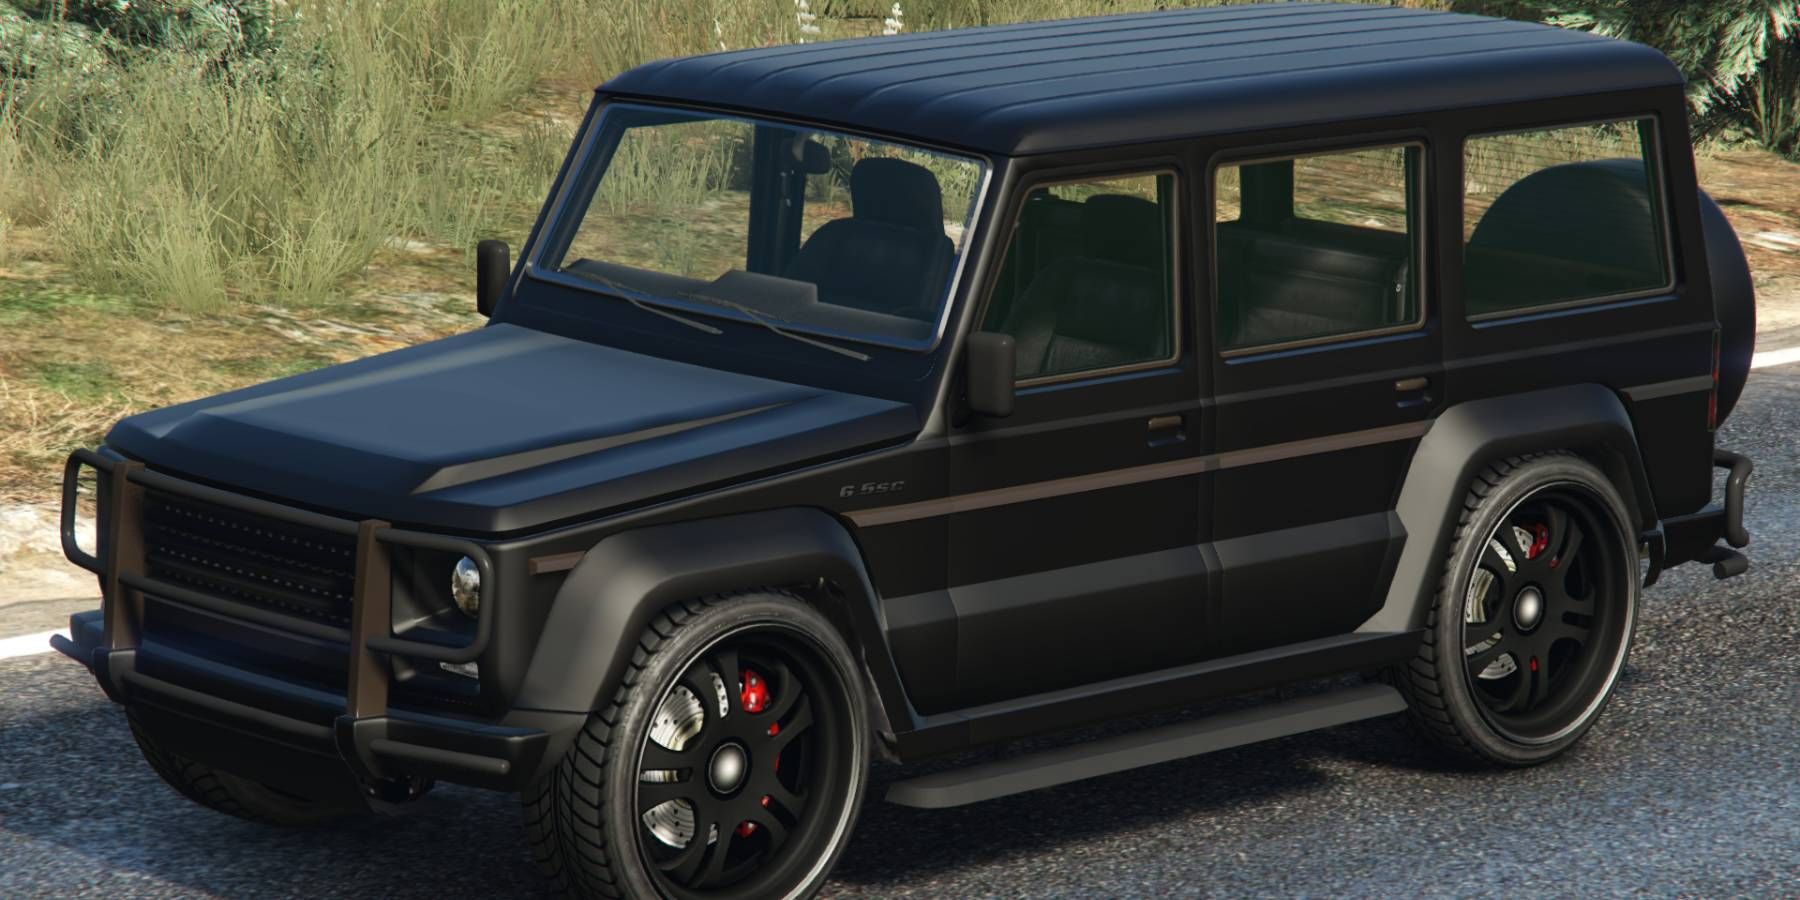 A Dubsta2 in Grand Theft Auto Online